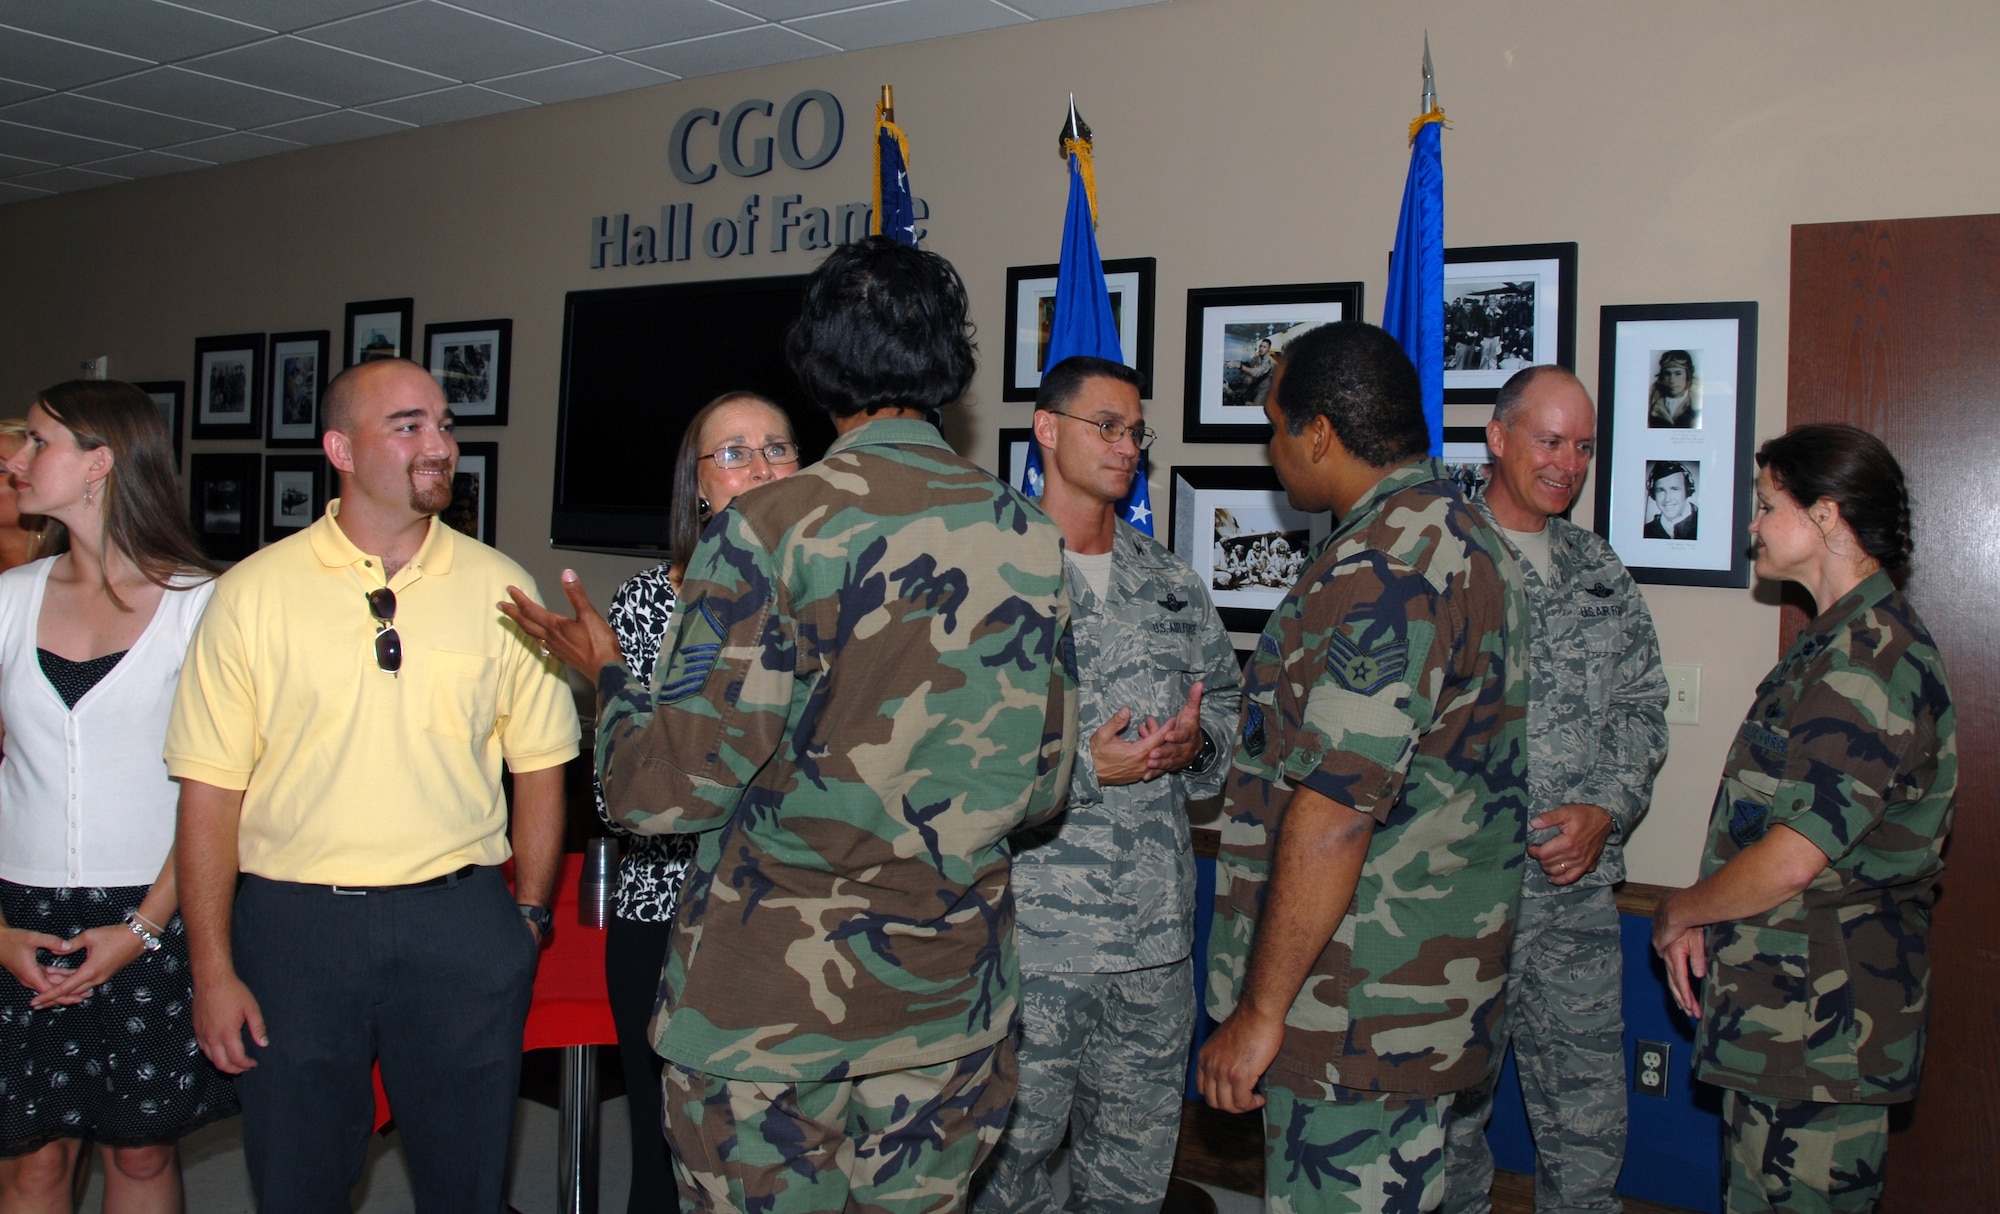 Col. Brett J. Clark, center, is welcomed by members of the 908th Airlift Wing during a reception following his change of command ceremony June 7 at Maxwell AFB, Ala.  The colonel is flanked by his mom, Collette, left, and his second in command, Col. Jon Andre, right.  The Montgomery, Ala.-based 908th AW is Alabama's only Air Force Reserve unit. 
(U.S. Air Force photo by Mr. Jeff Melvin)